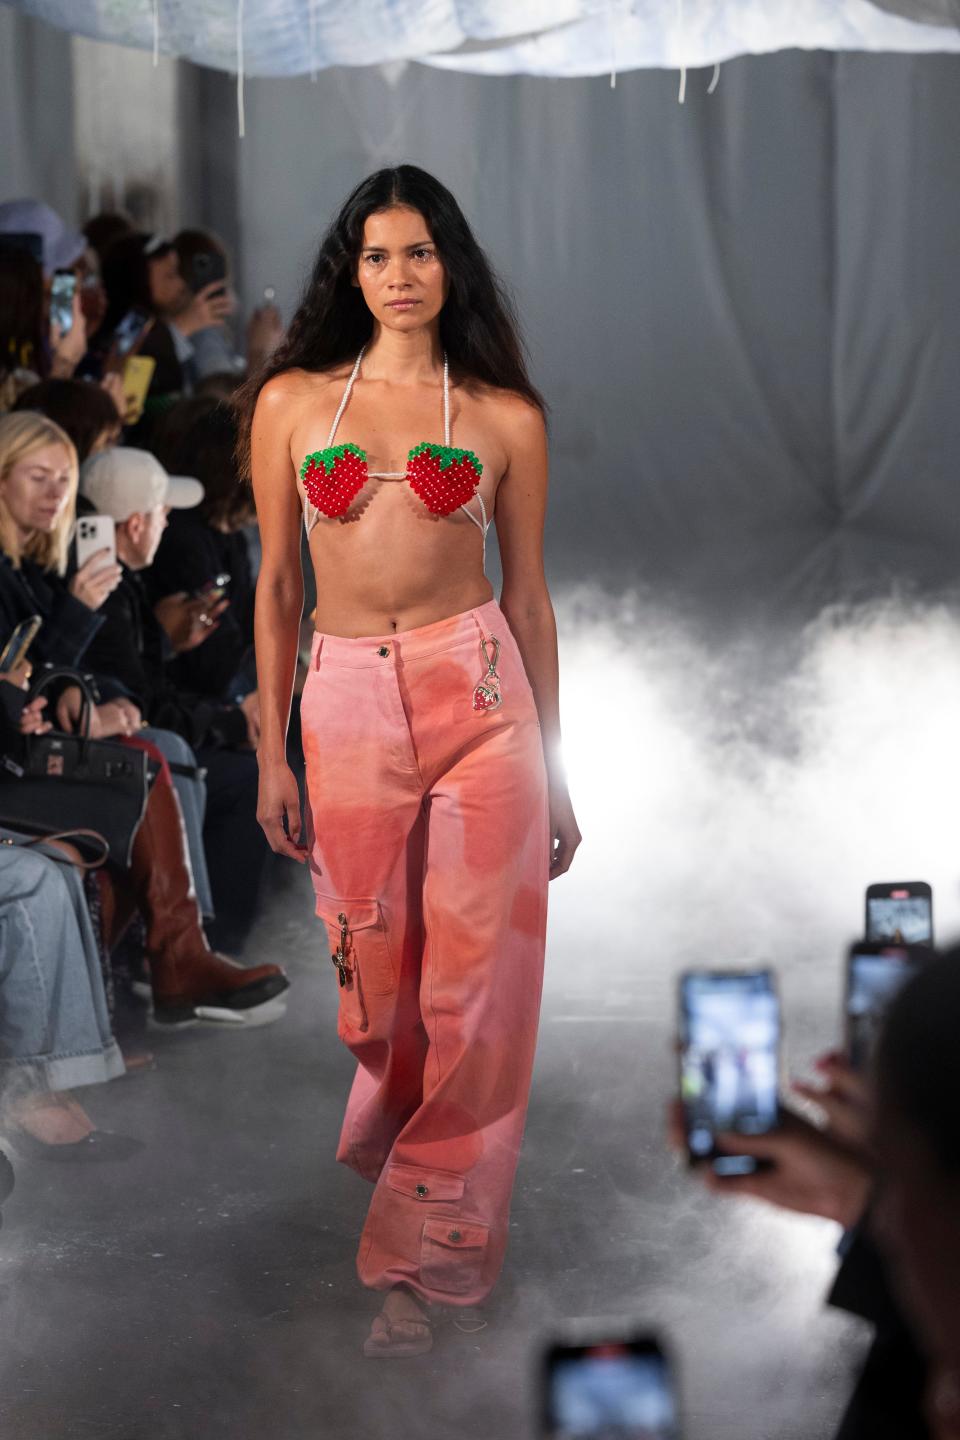 A model at the Helmstedt fashion show wearing a beaded strawberry bralette and pink denim jeans